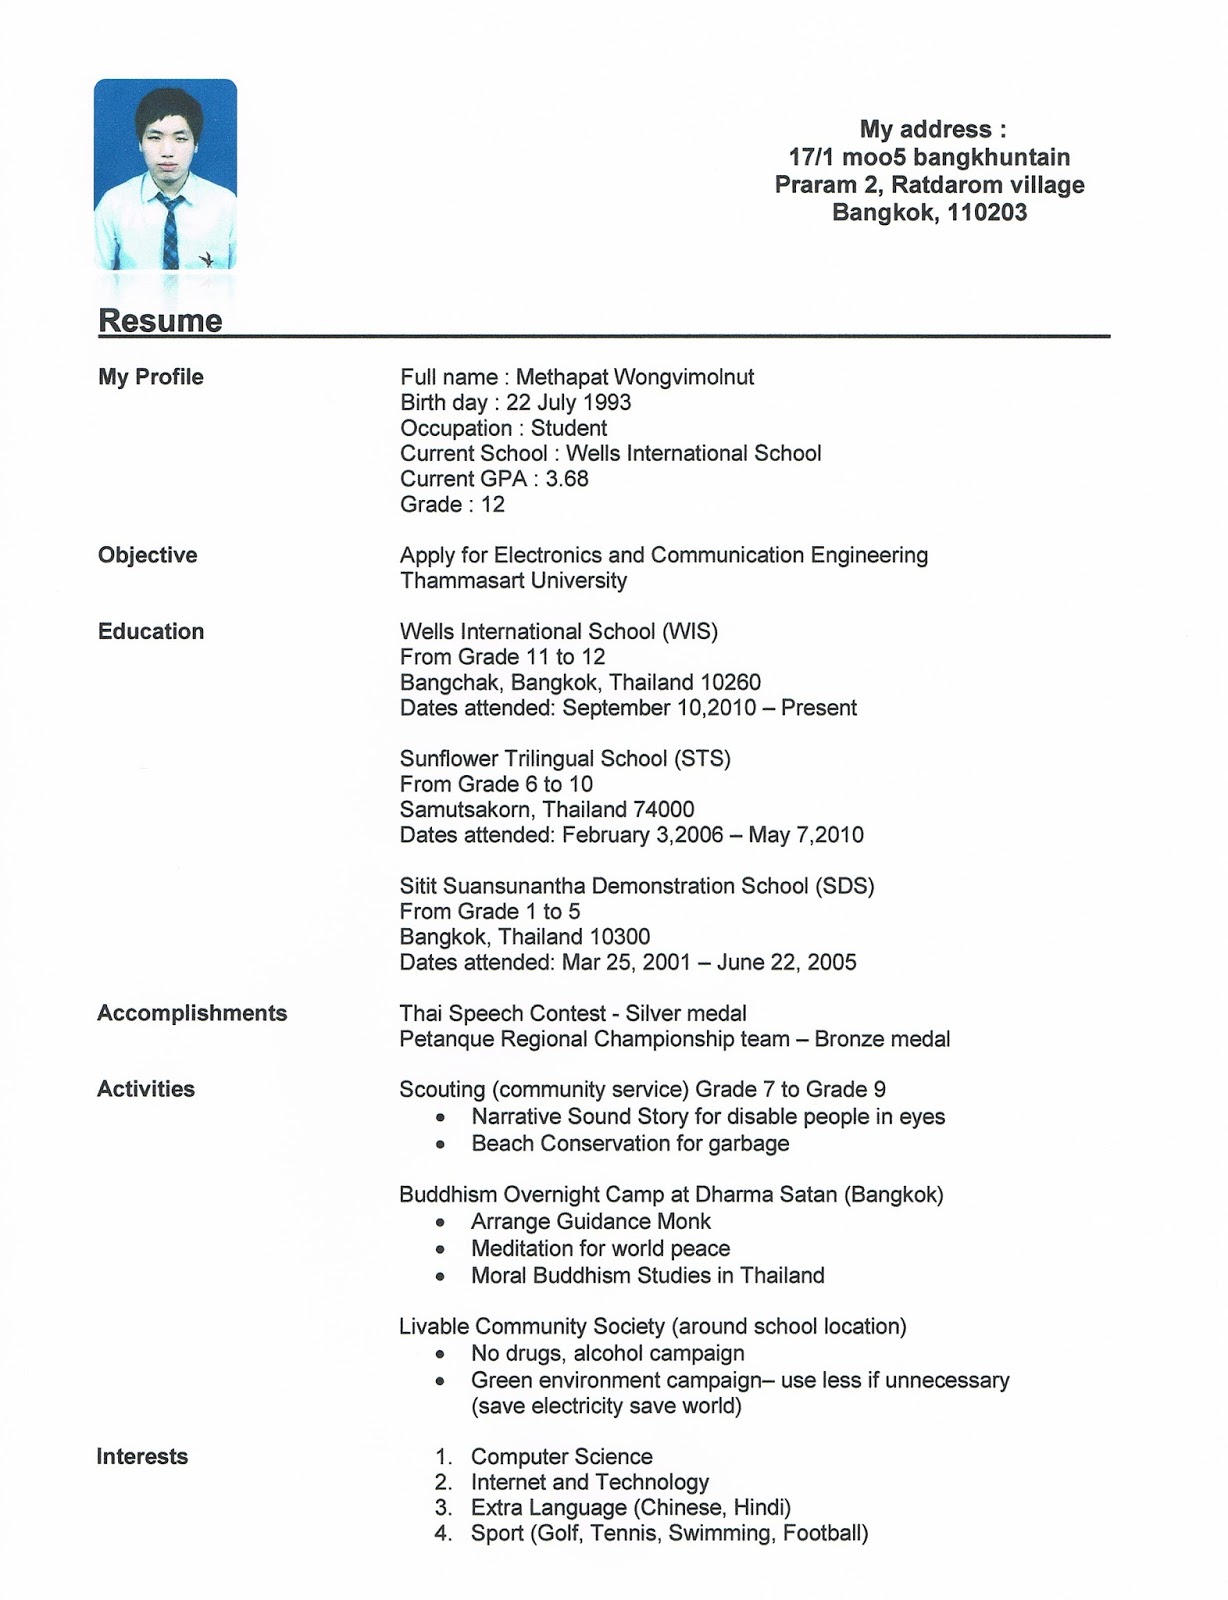 Sample resume college student no experience